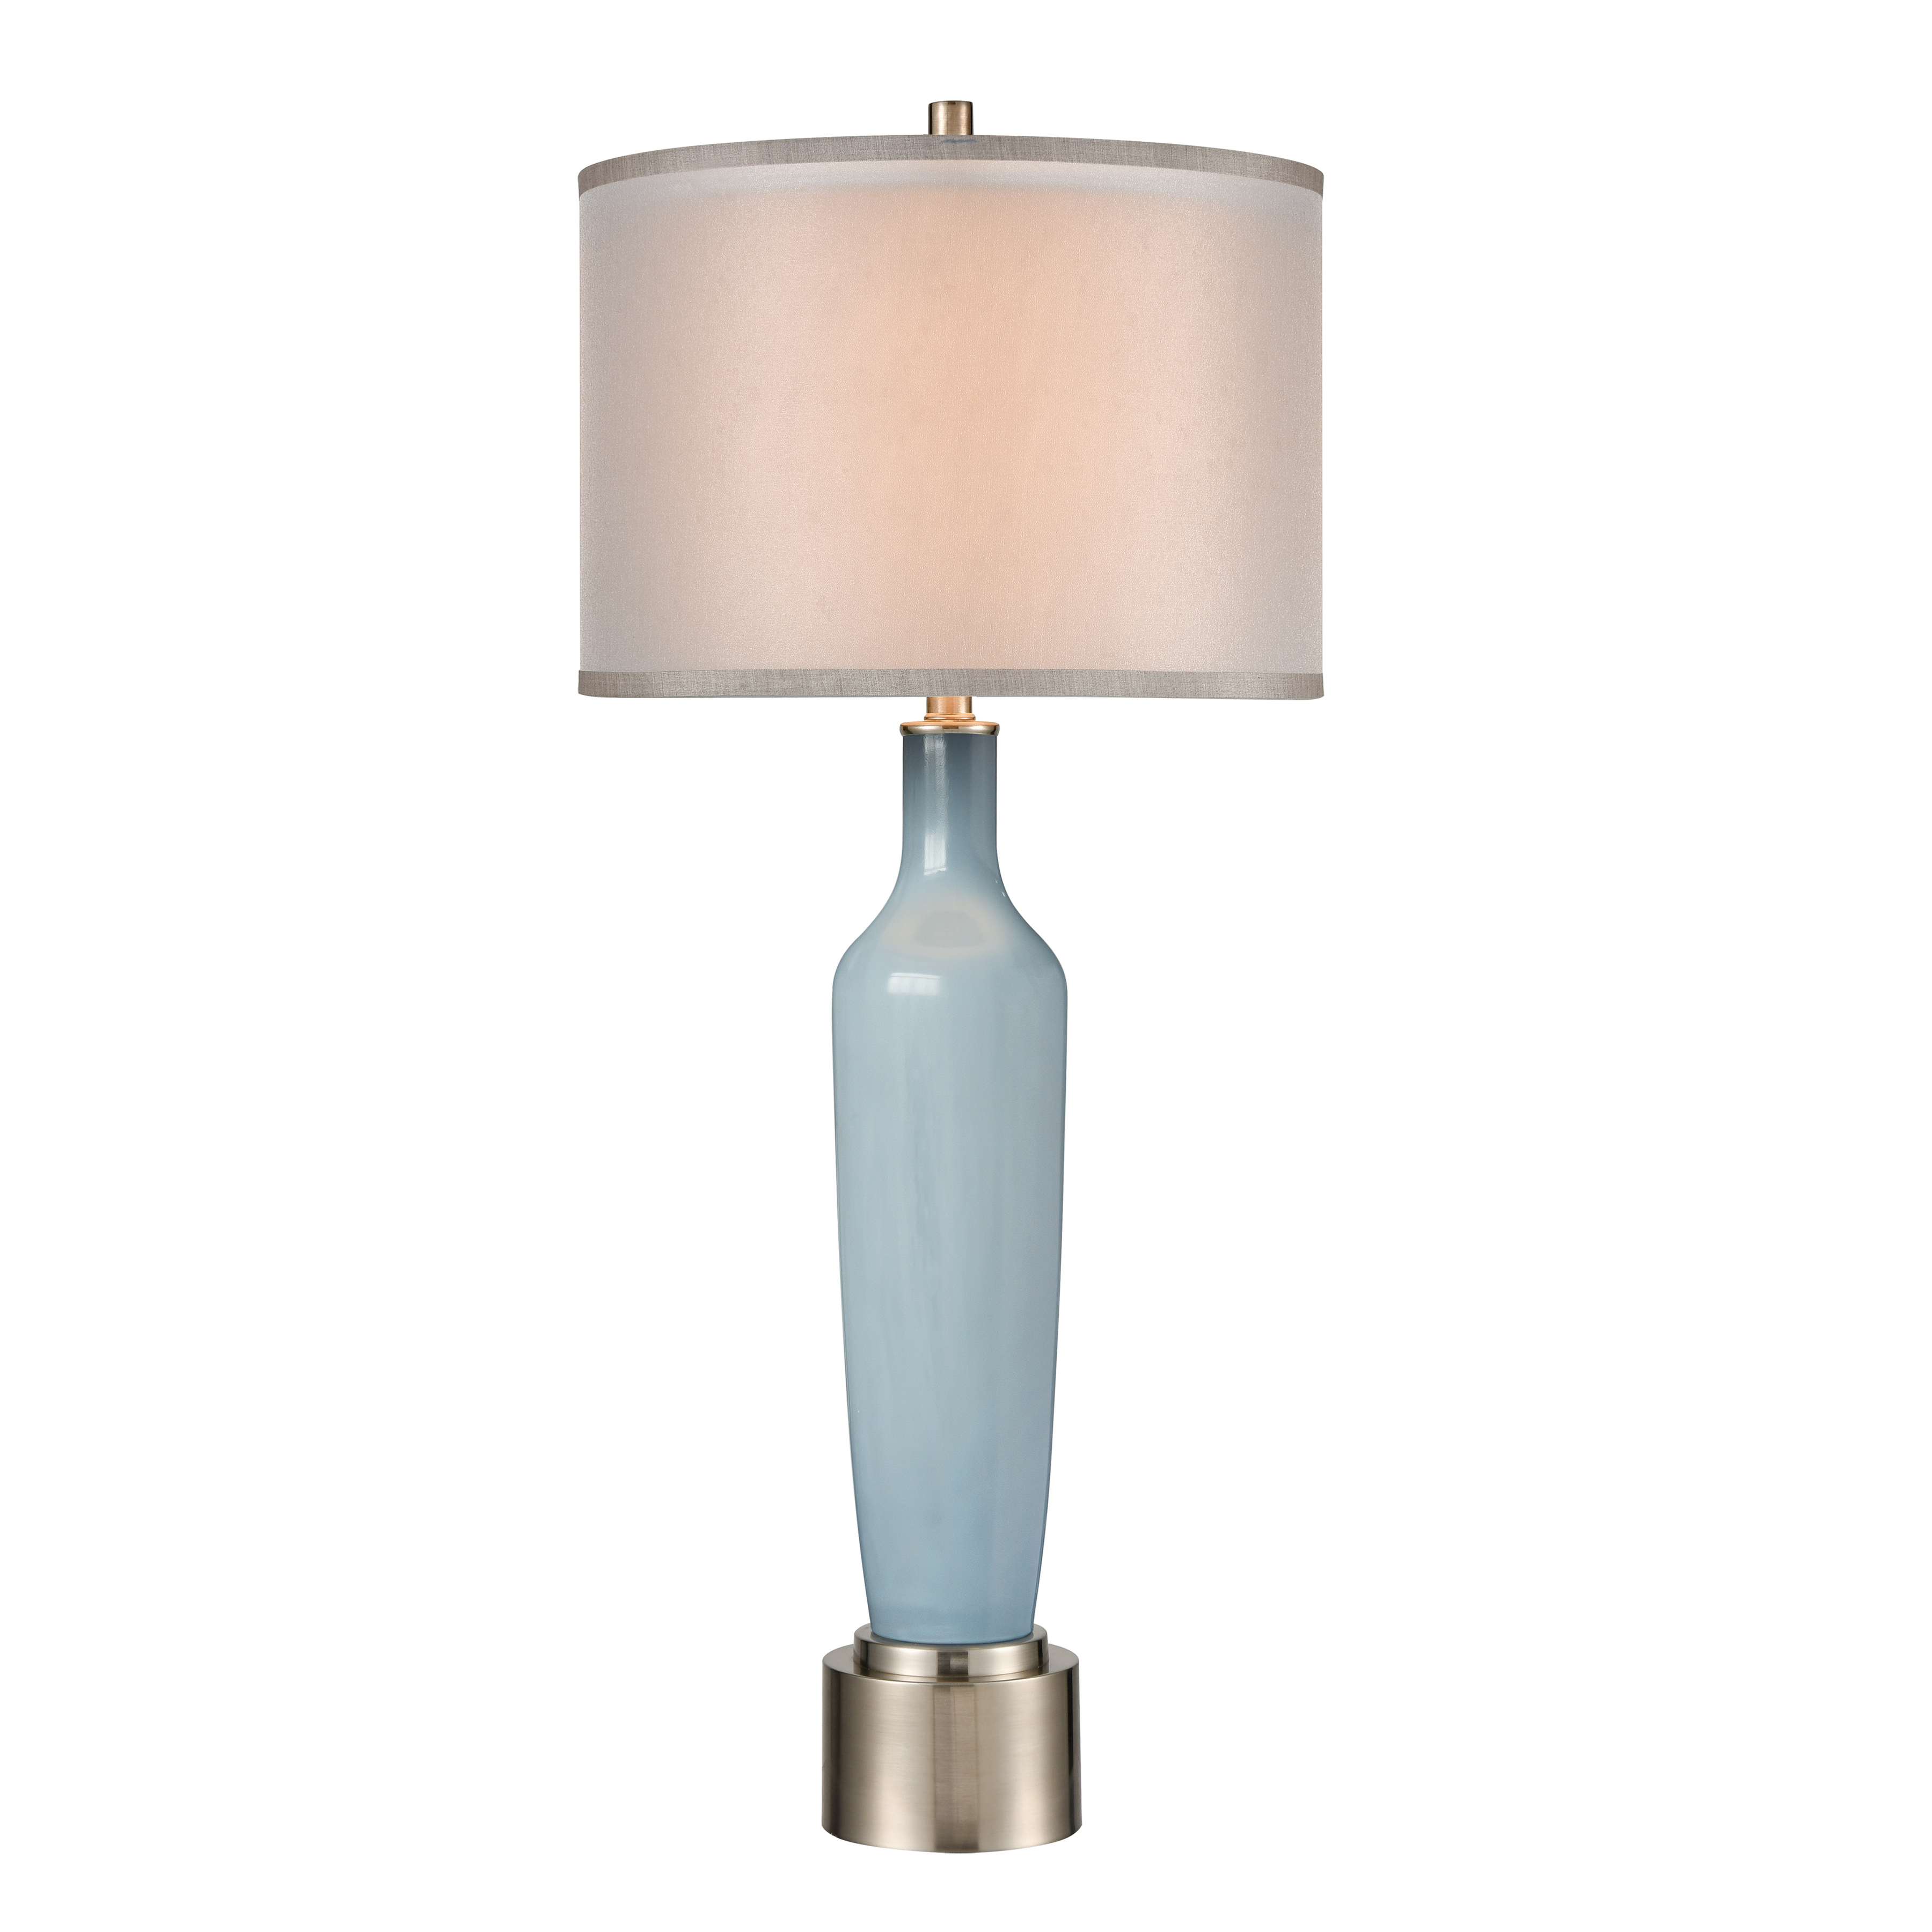 Latour Table Lamp in Tarnished Nickel - image 1 of 2